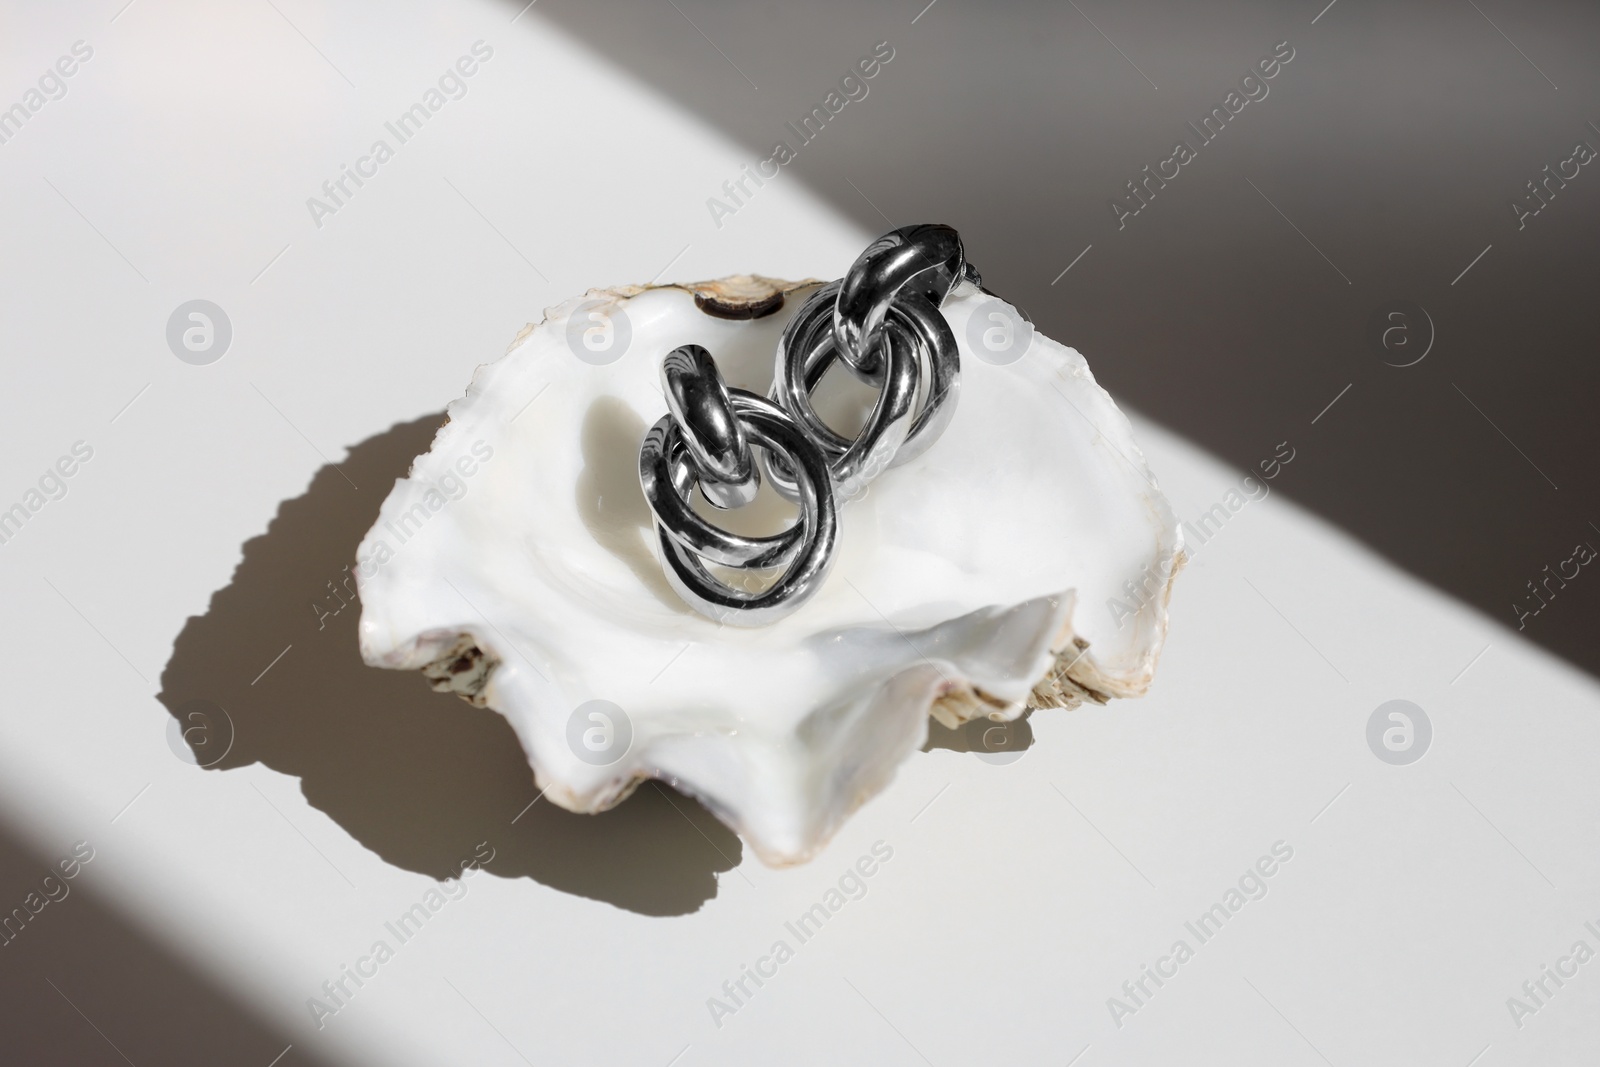 Photo of Stylish metal earrings in seashell on white table